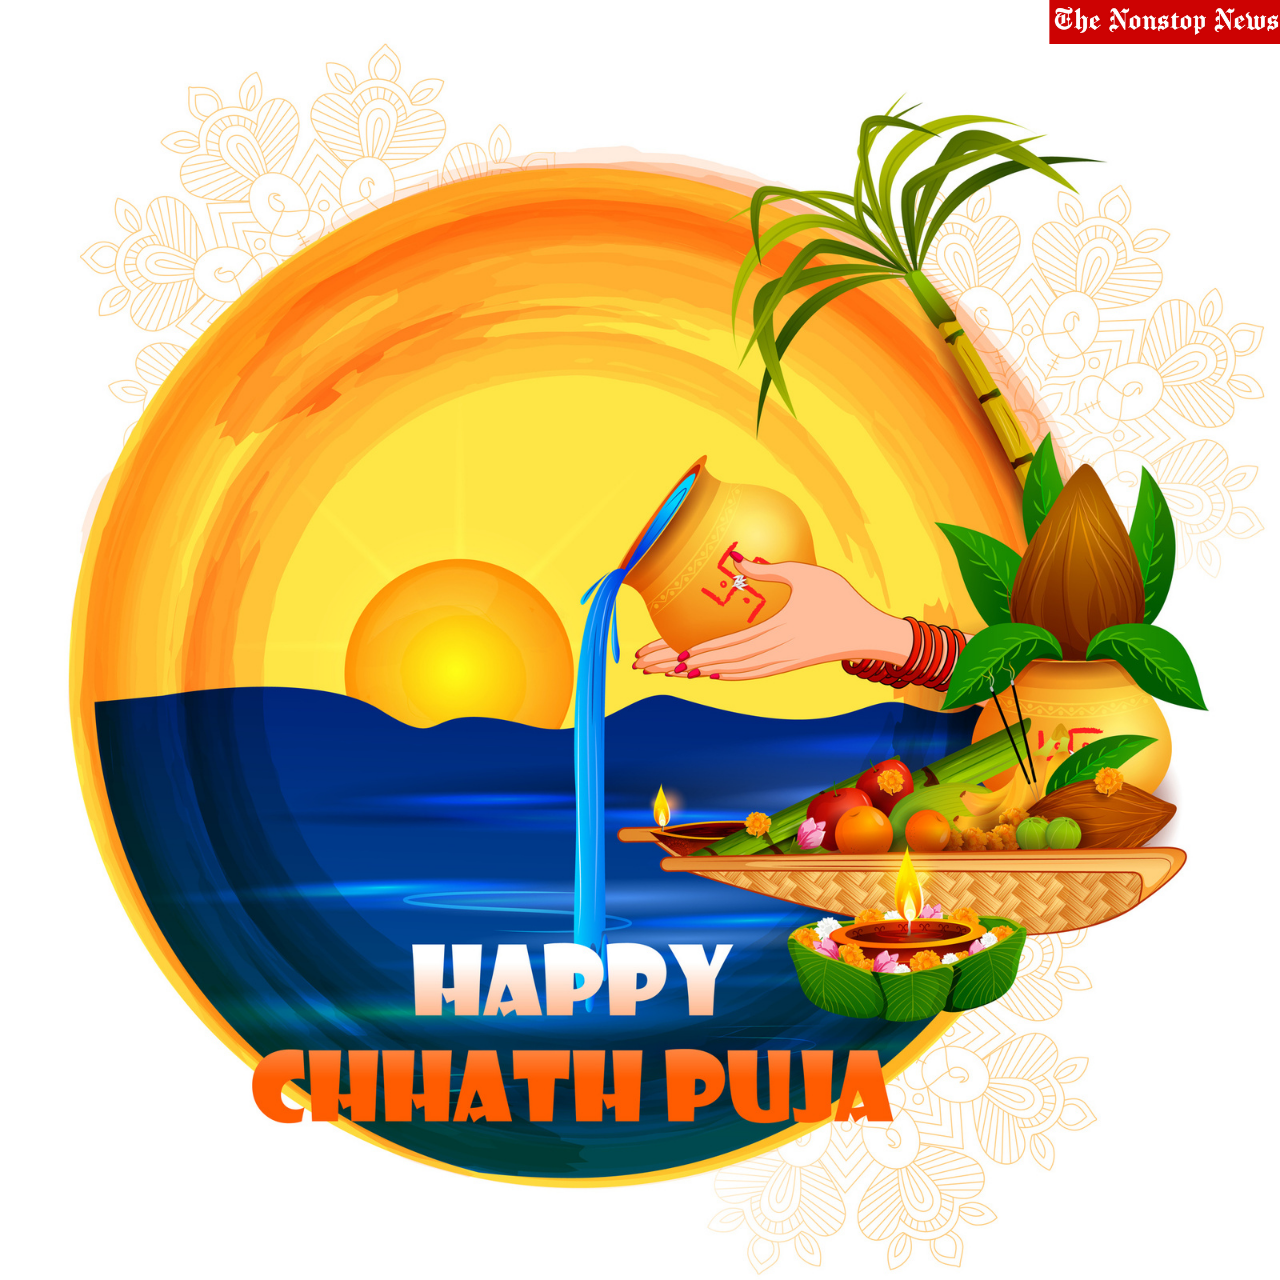 Chhath Puja 2021 Instagram Captions, WhatsApp Status, Facebook Post, and Twitter Wishes to Share on Deepavali